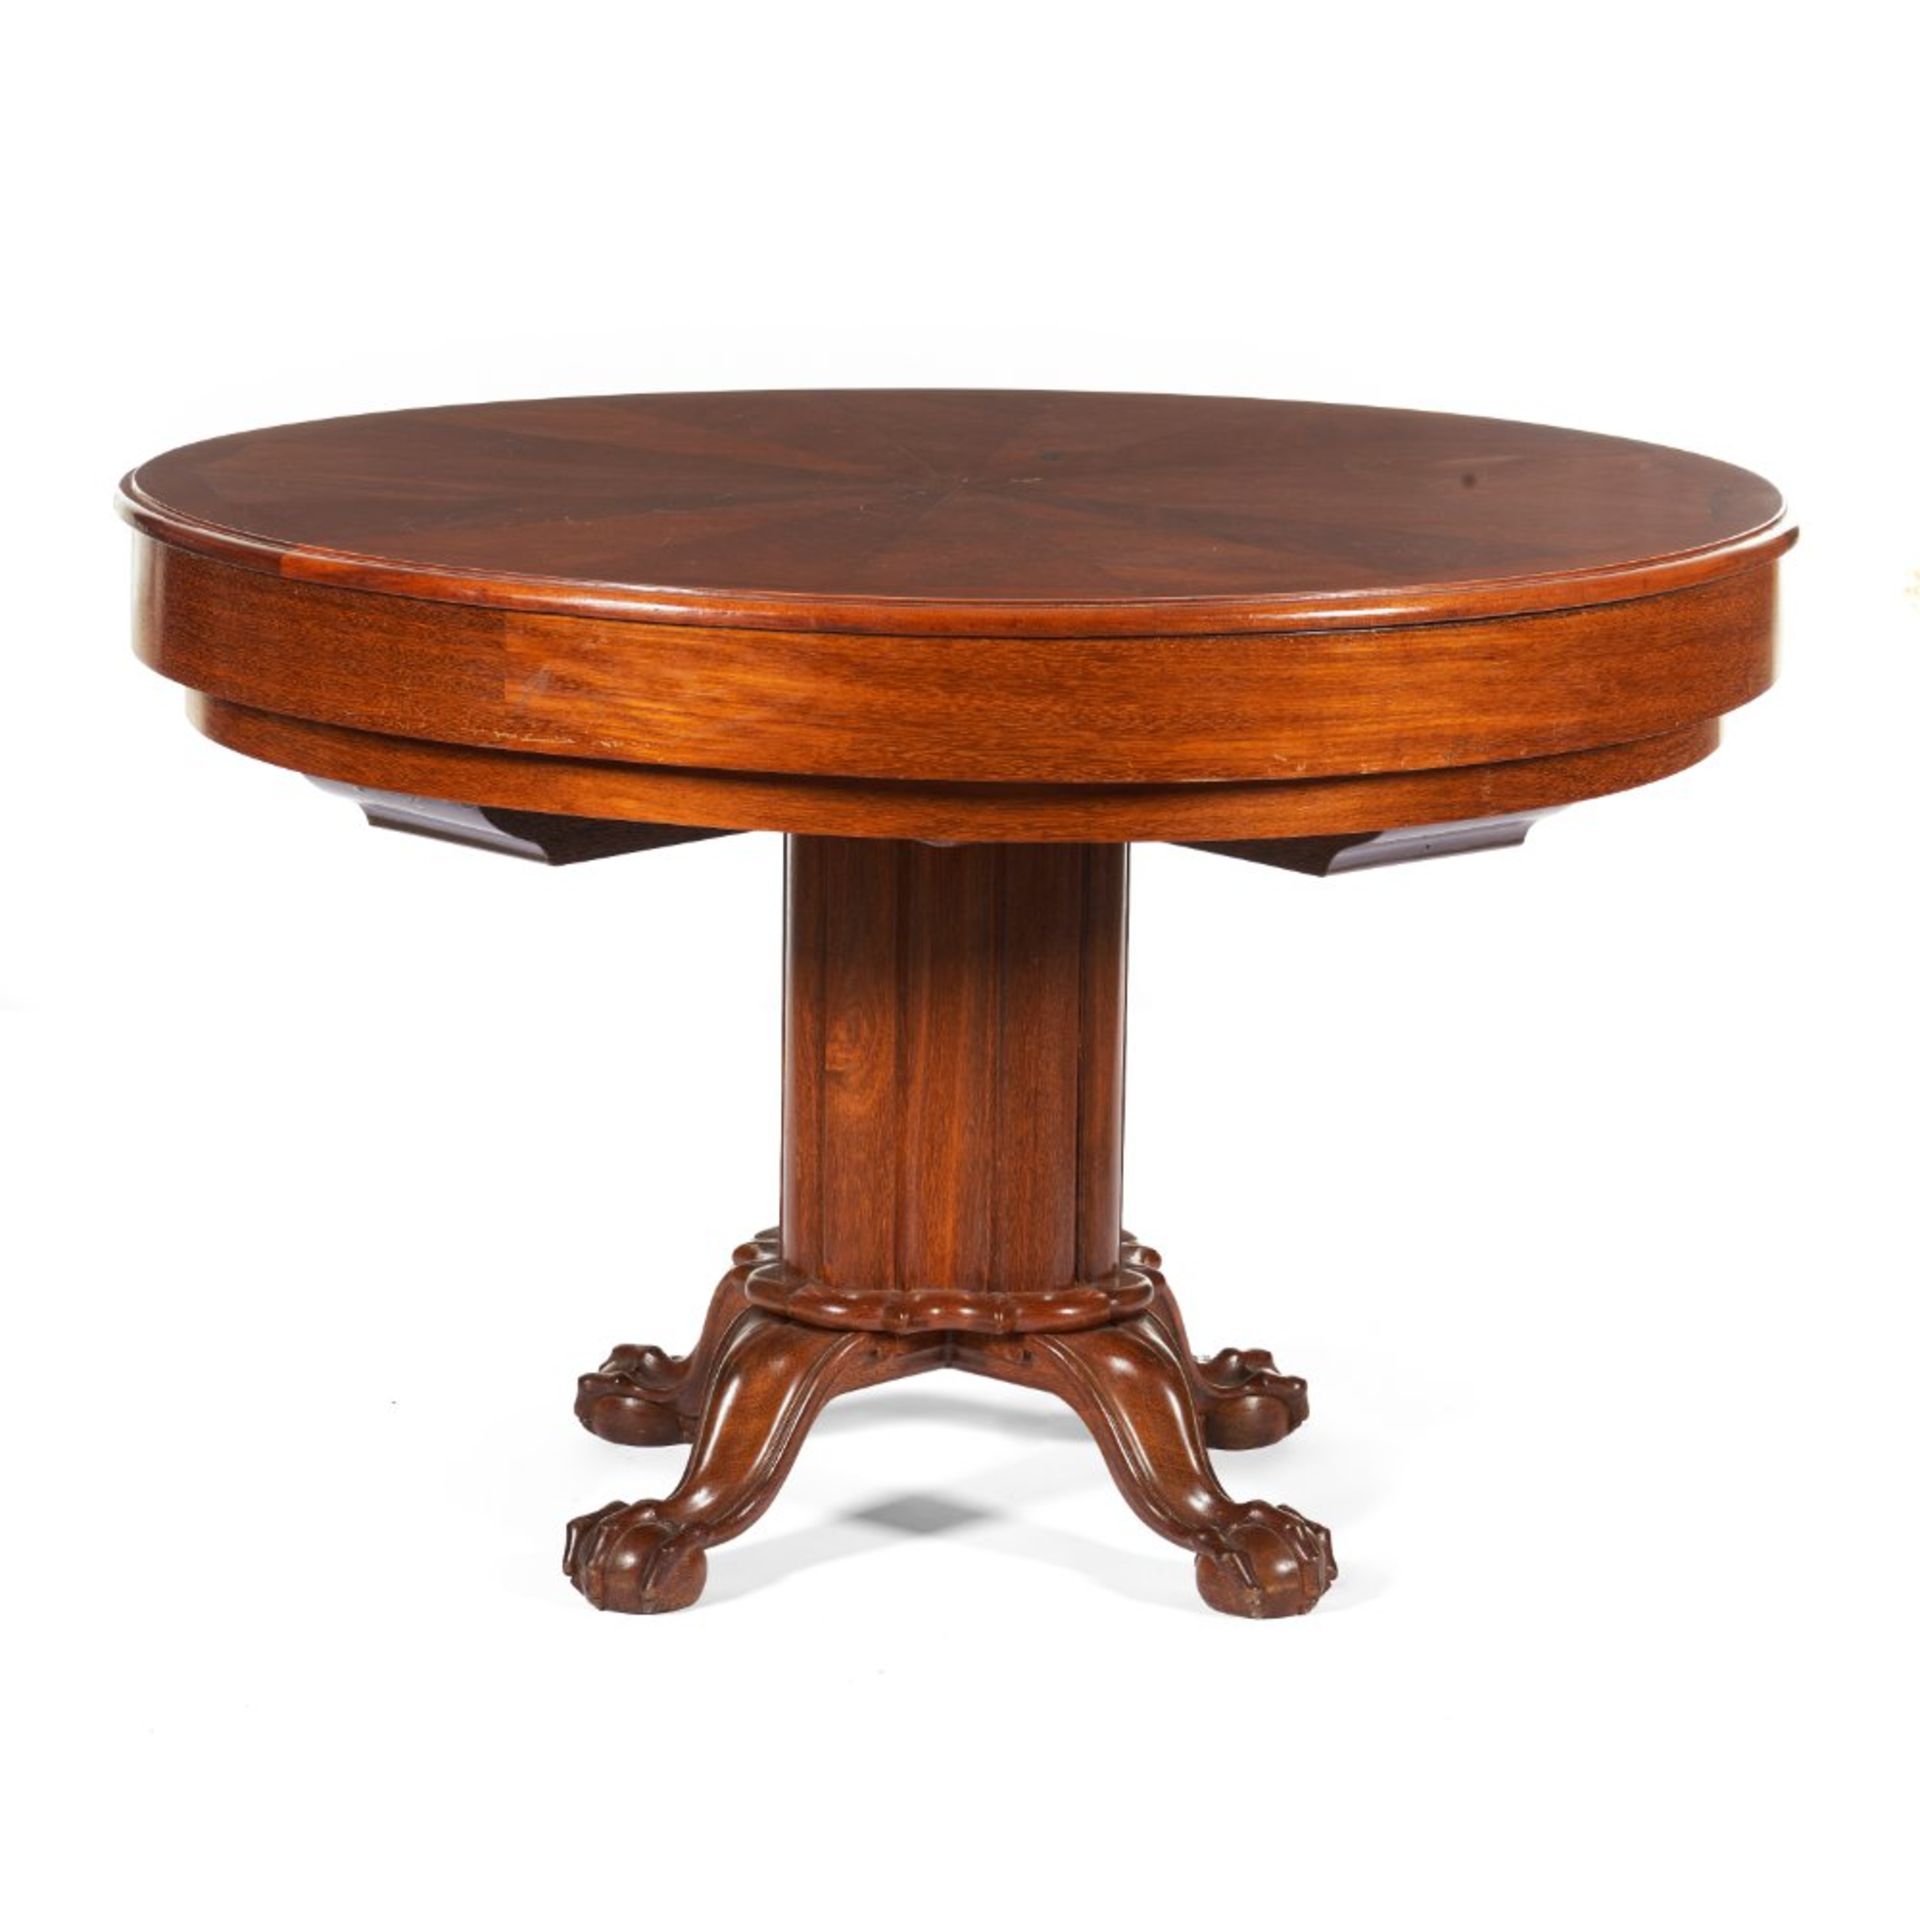 A George III style jupe table - Image 2 of 2